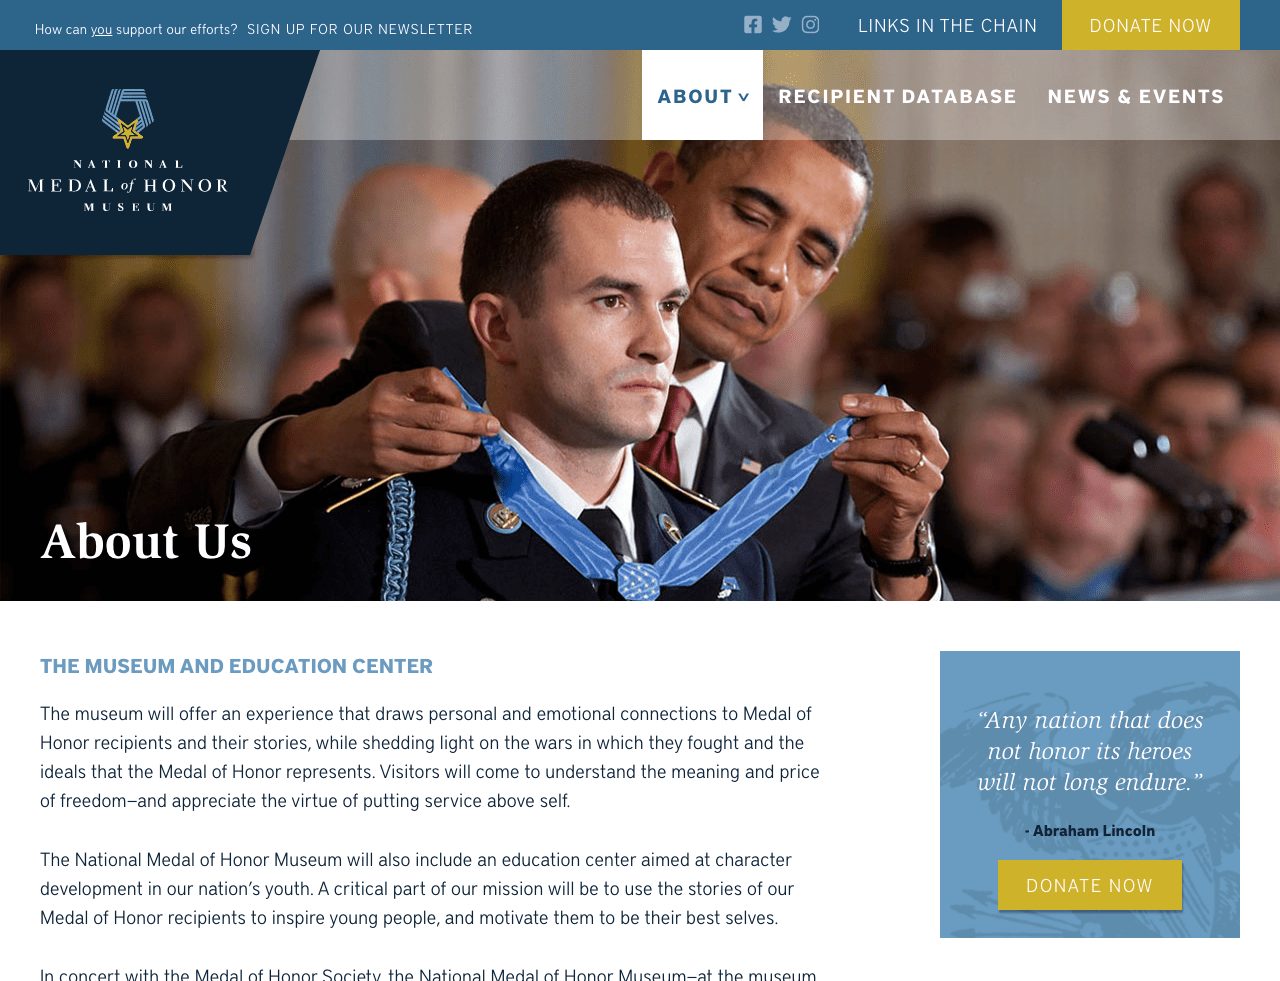 The National Medal of Honor Museum Image